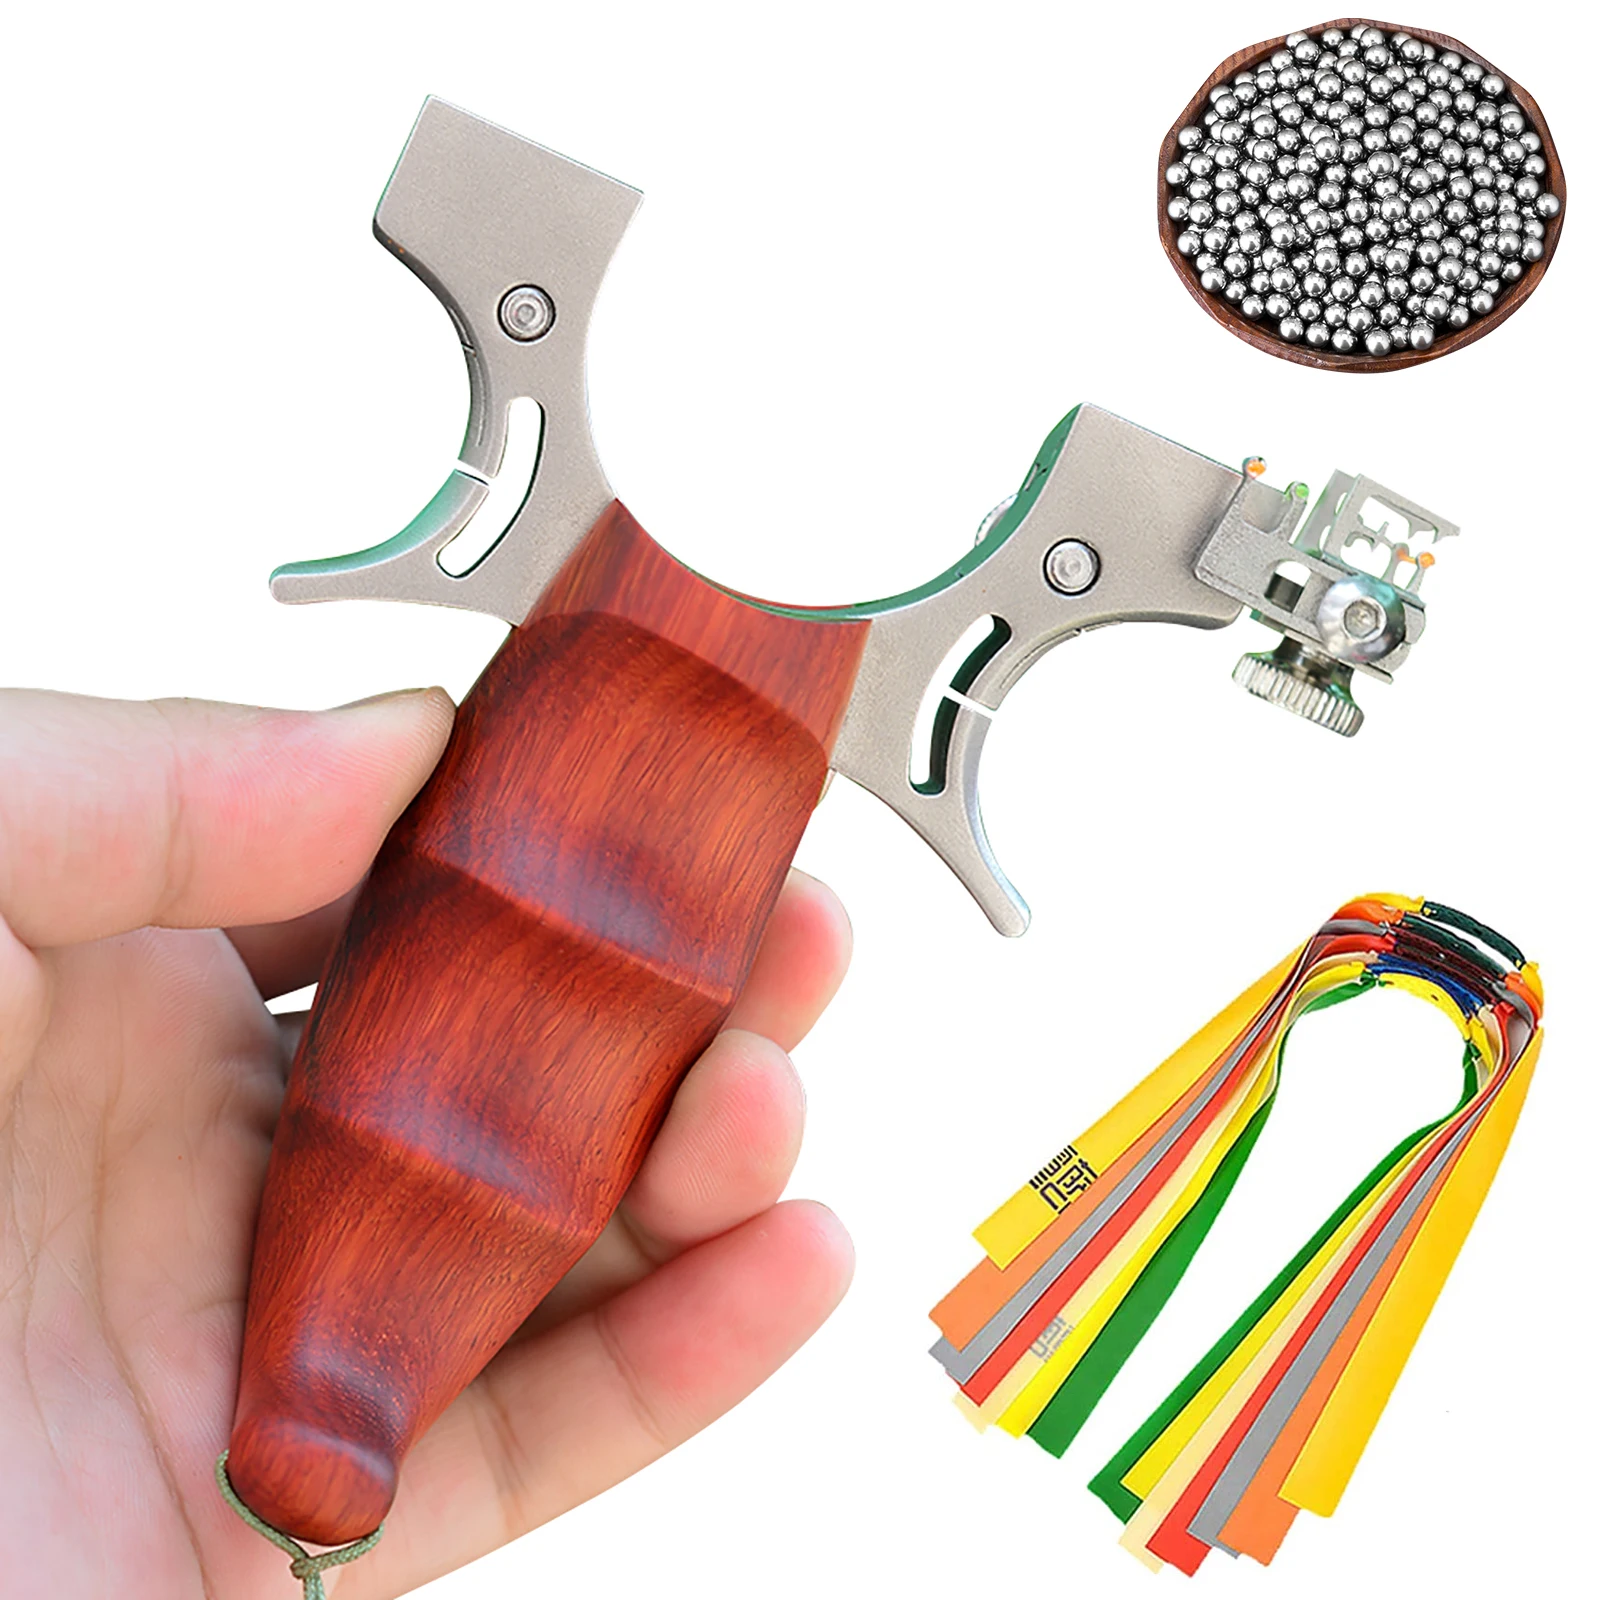 

Catapult Slingshot Hunting Fishing with 7Pcs Rubber Band 100pcs Ammo Powerful Wood Stainless Steel Sling Shot for Shooting